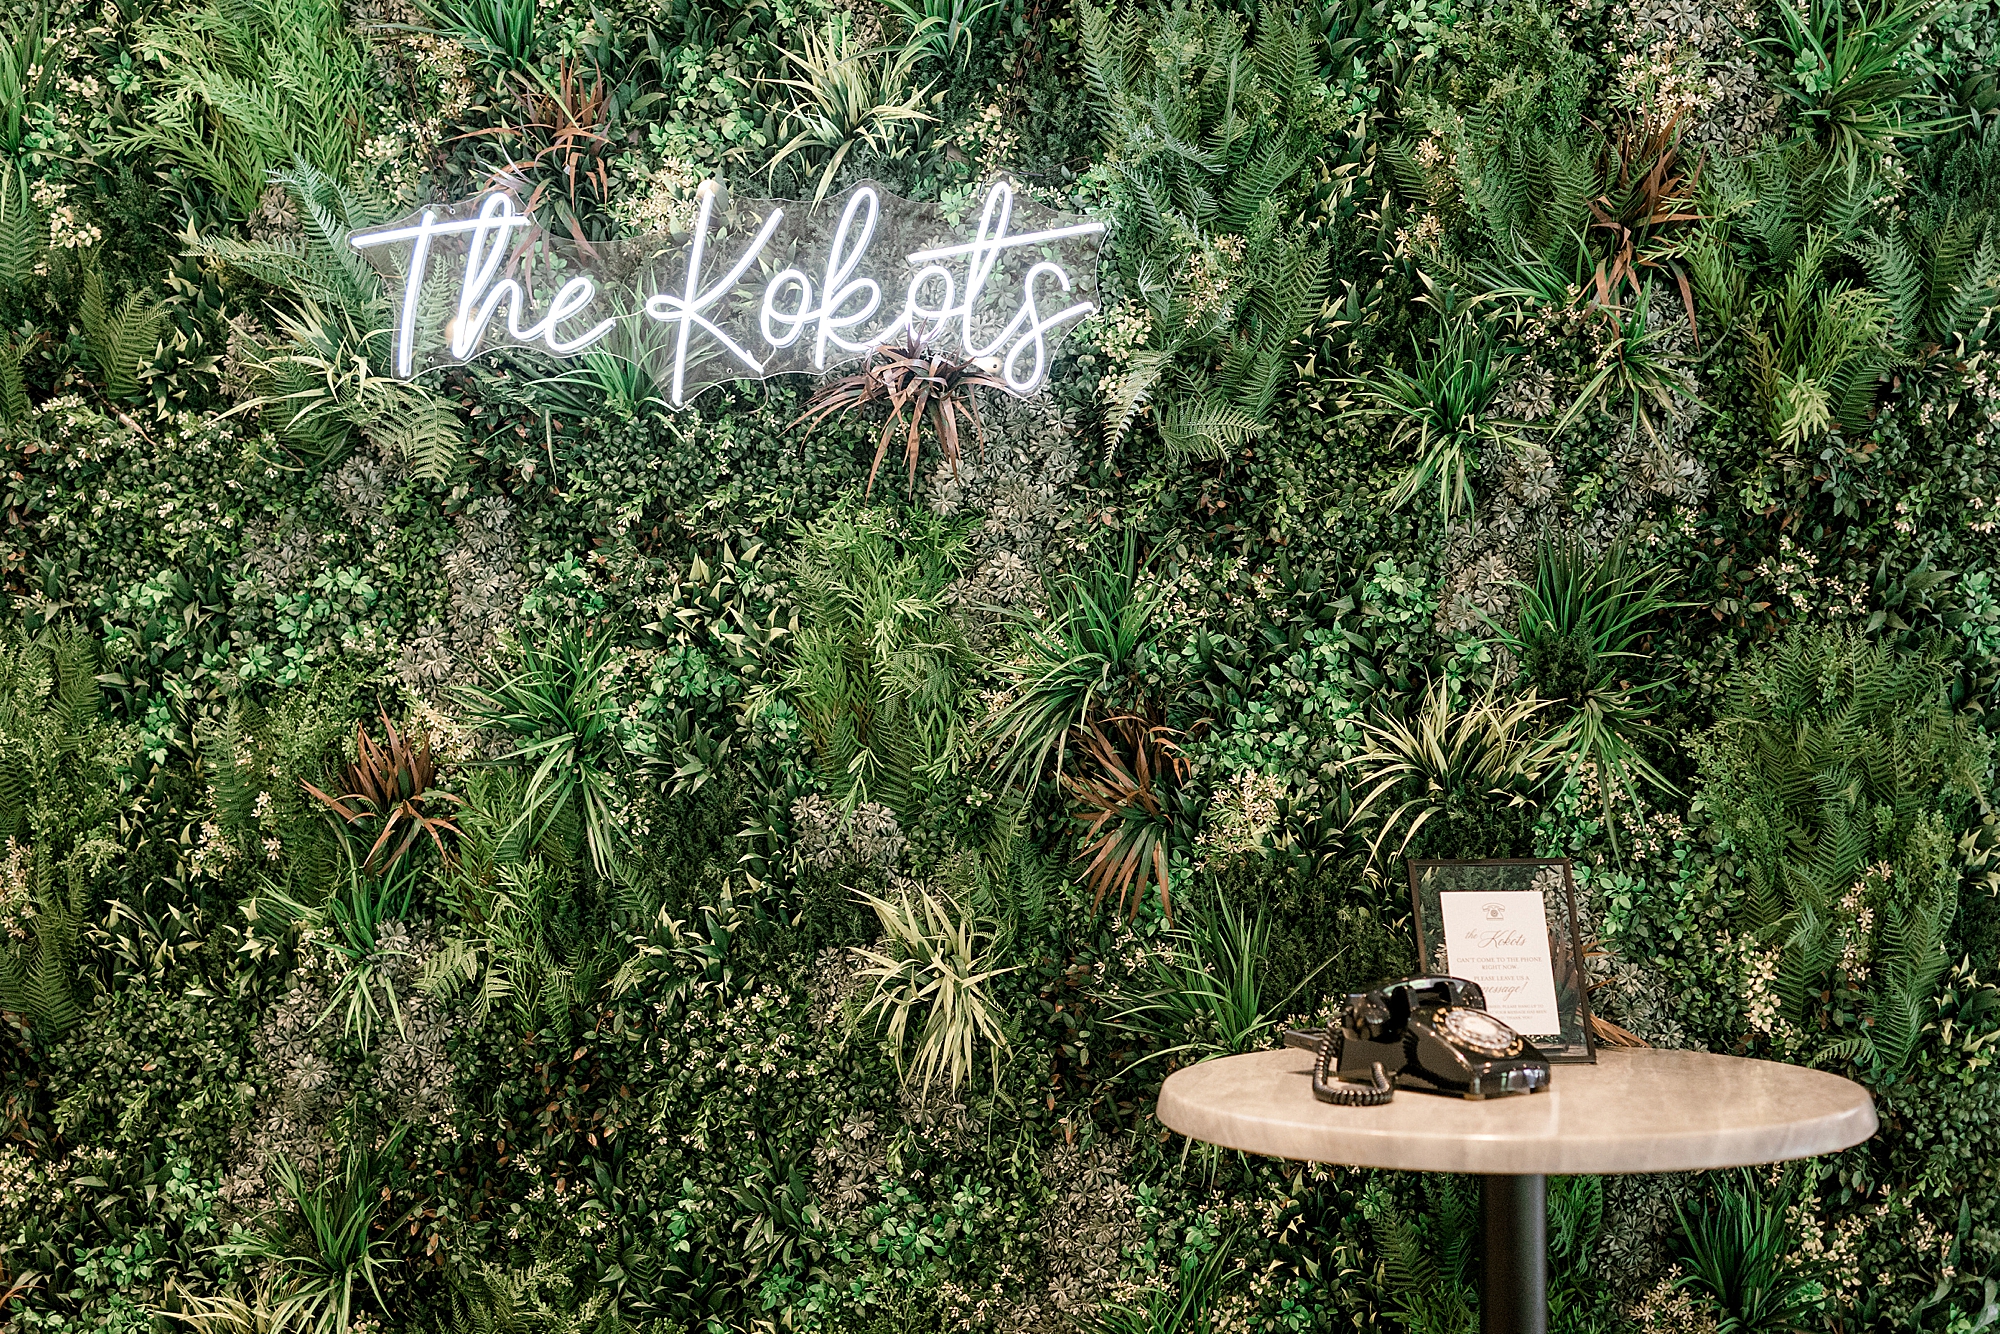 greenery wall with custom neon sign "THE KOBOTS" with audio guestbook